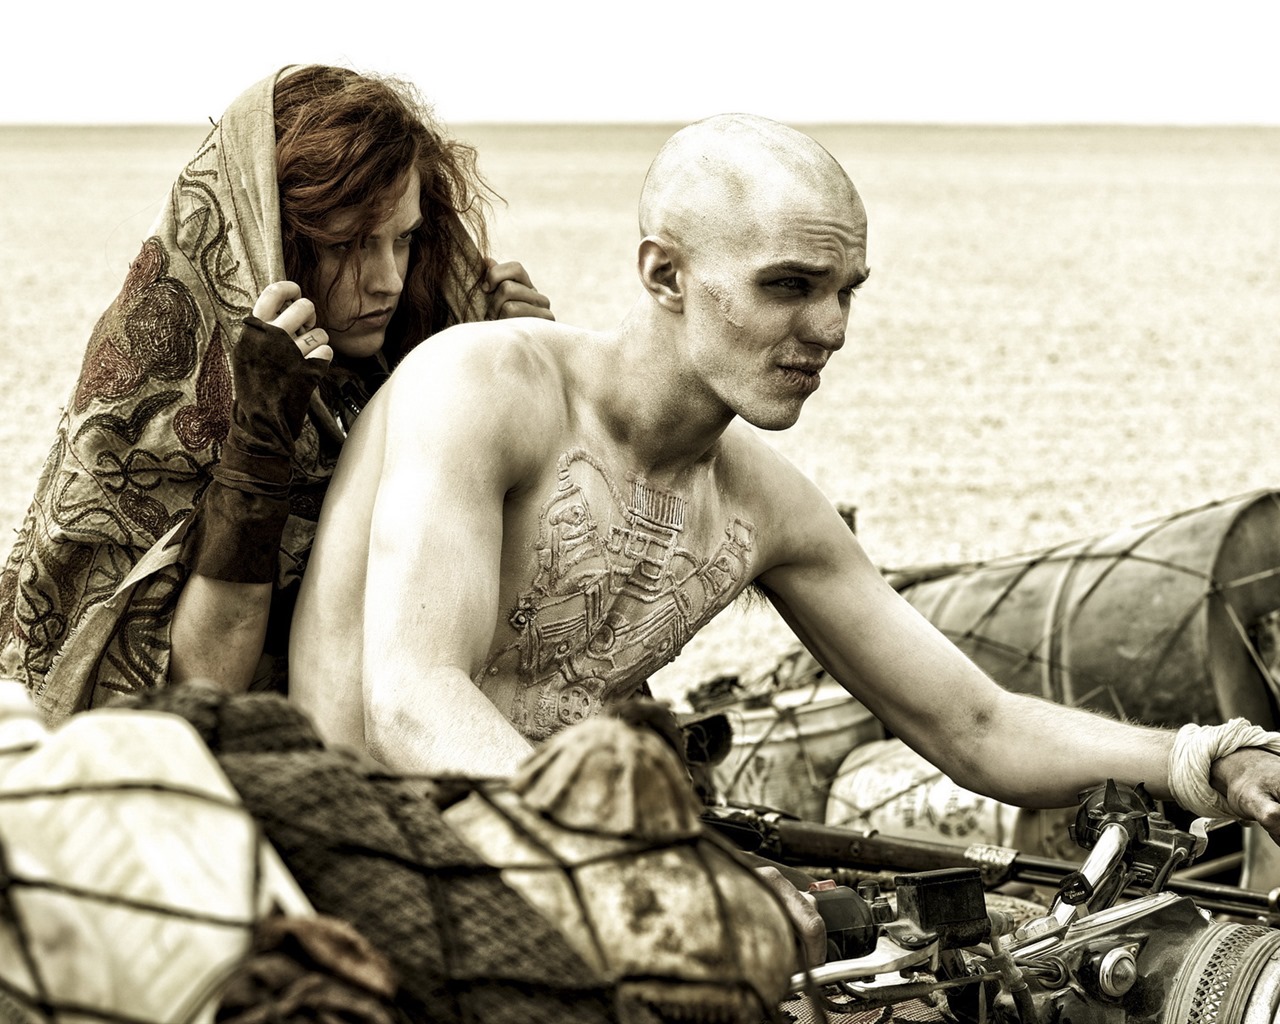 Mad Max: Fury Road, HD movie wallpapers #13 - 1280x1024